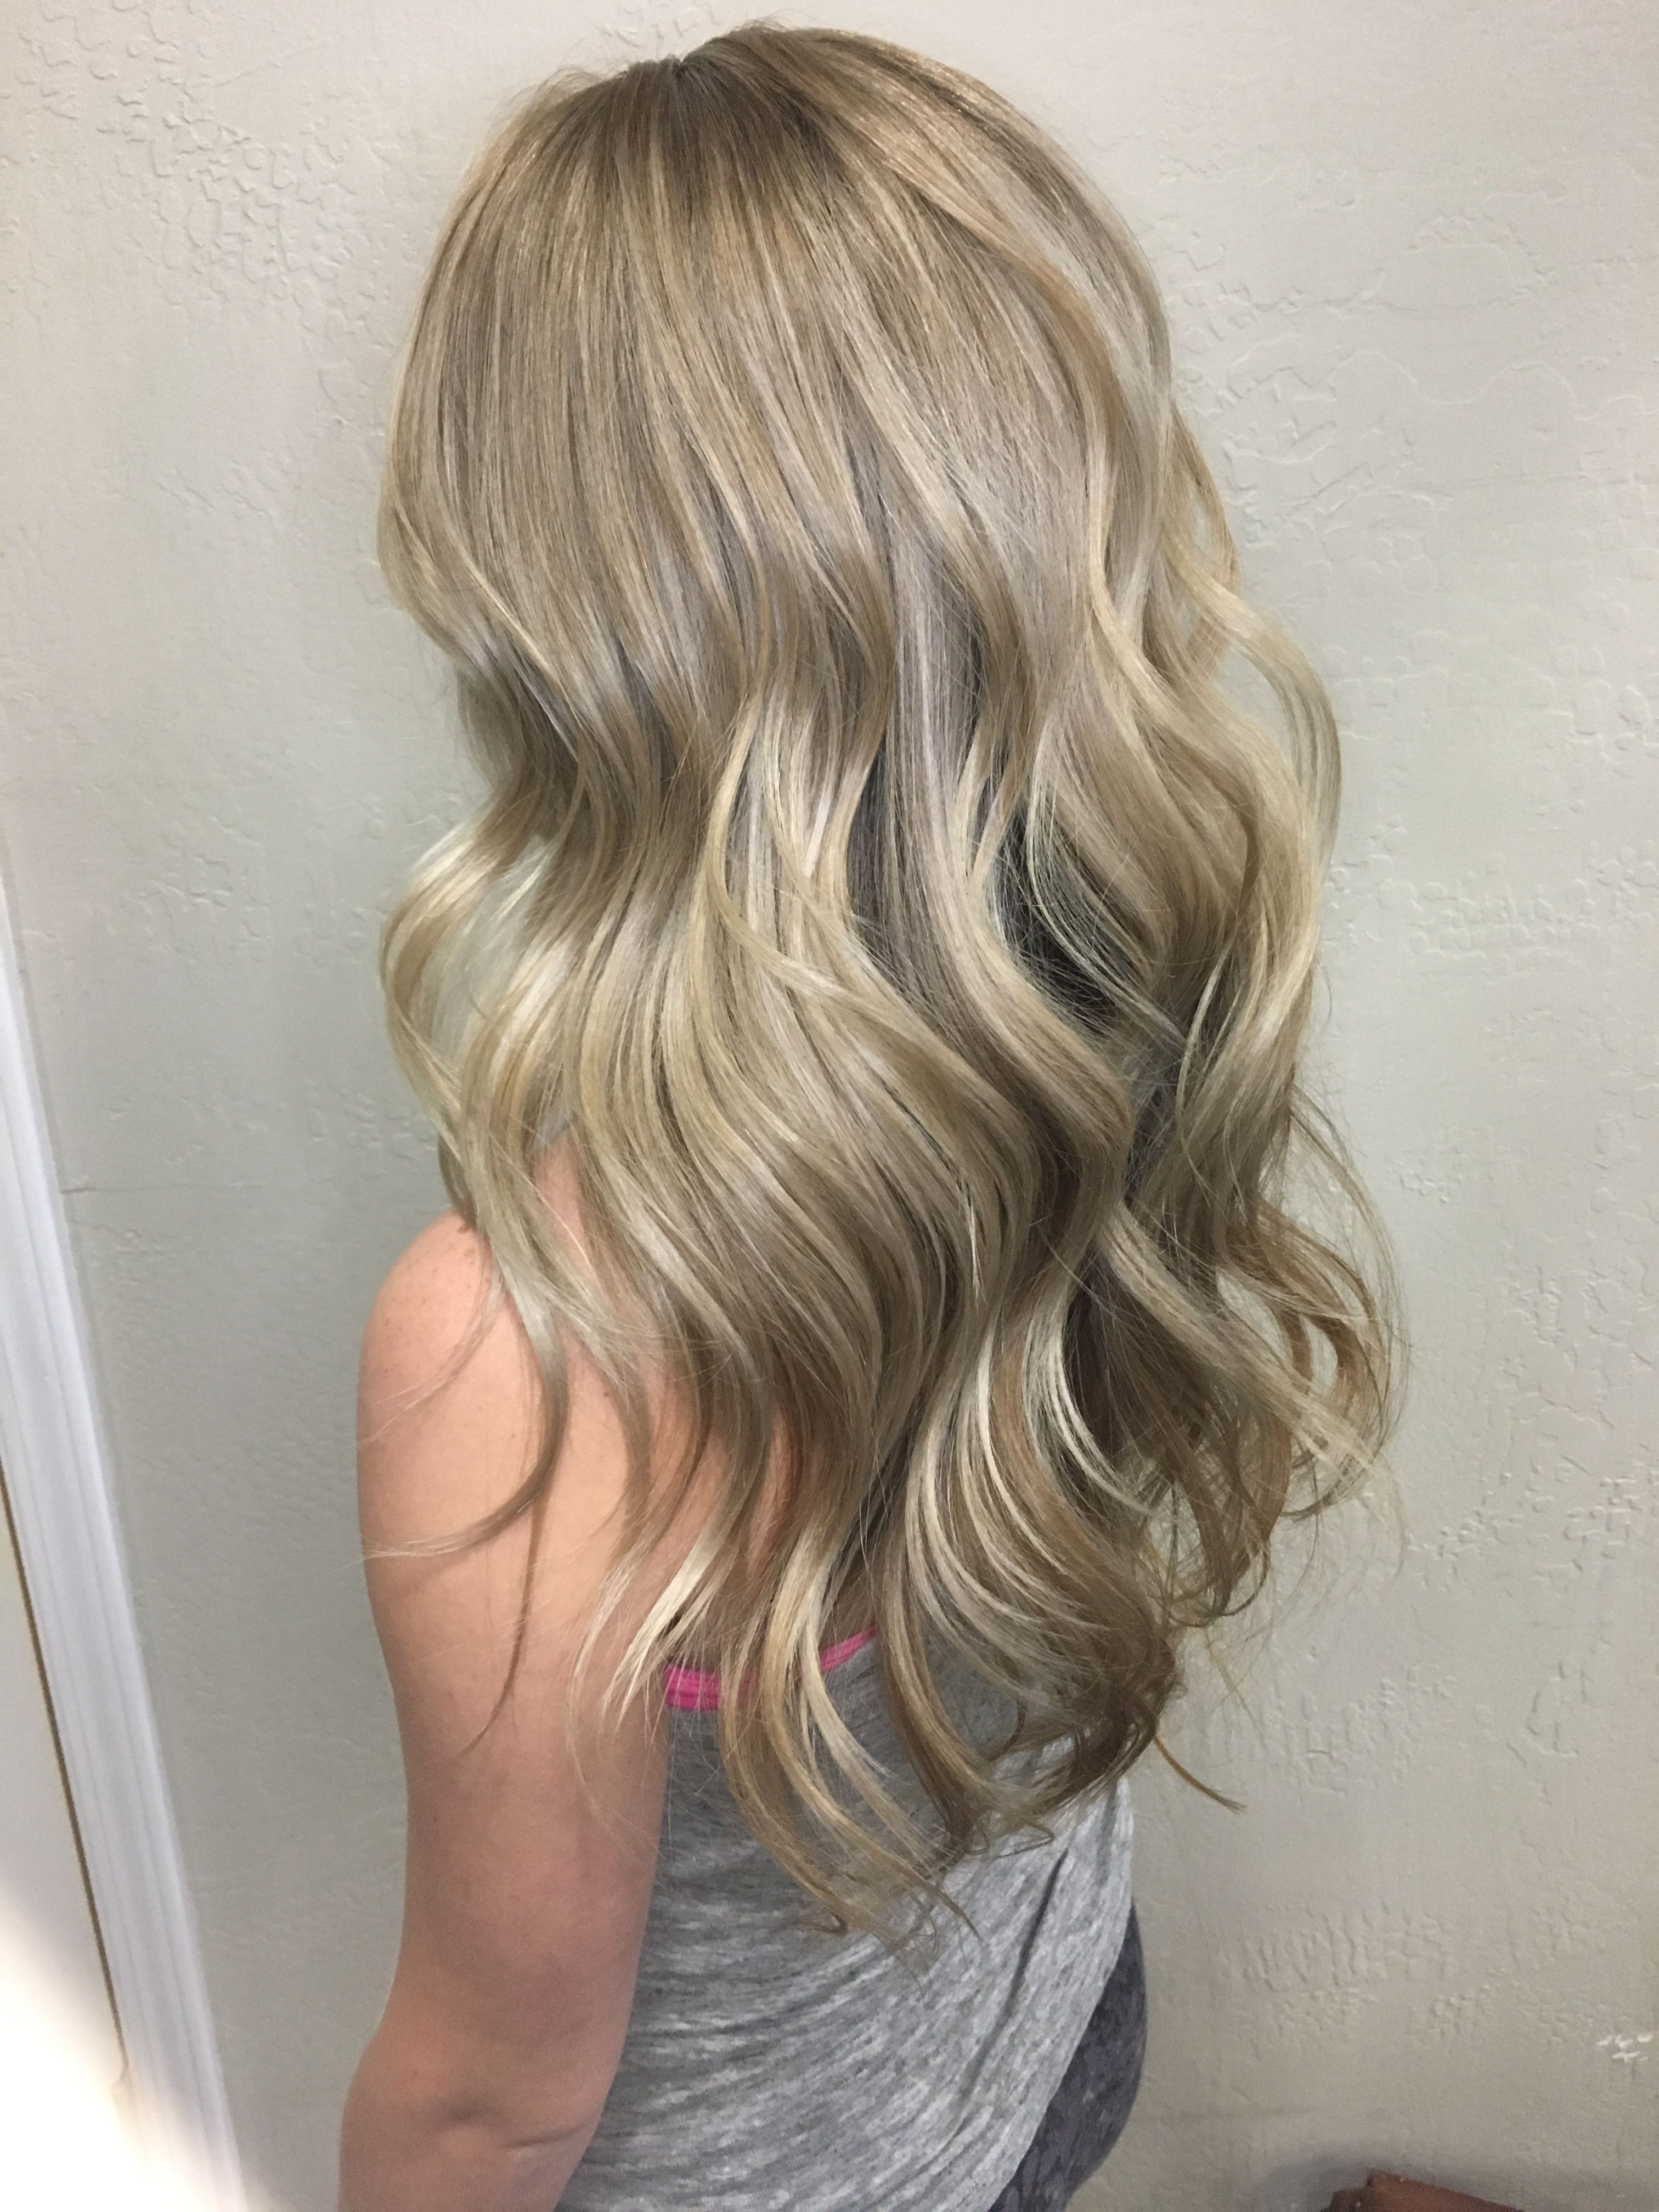 Balayage, Blonde Highlights, Light Blonde Hair, Hair Color, Ash Throughout Popular Feathered Ash Blonde Hairstyles (Gallery 5 of 20)